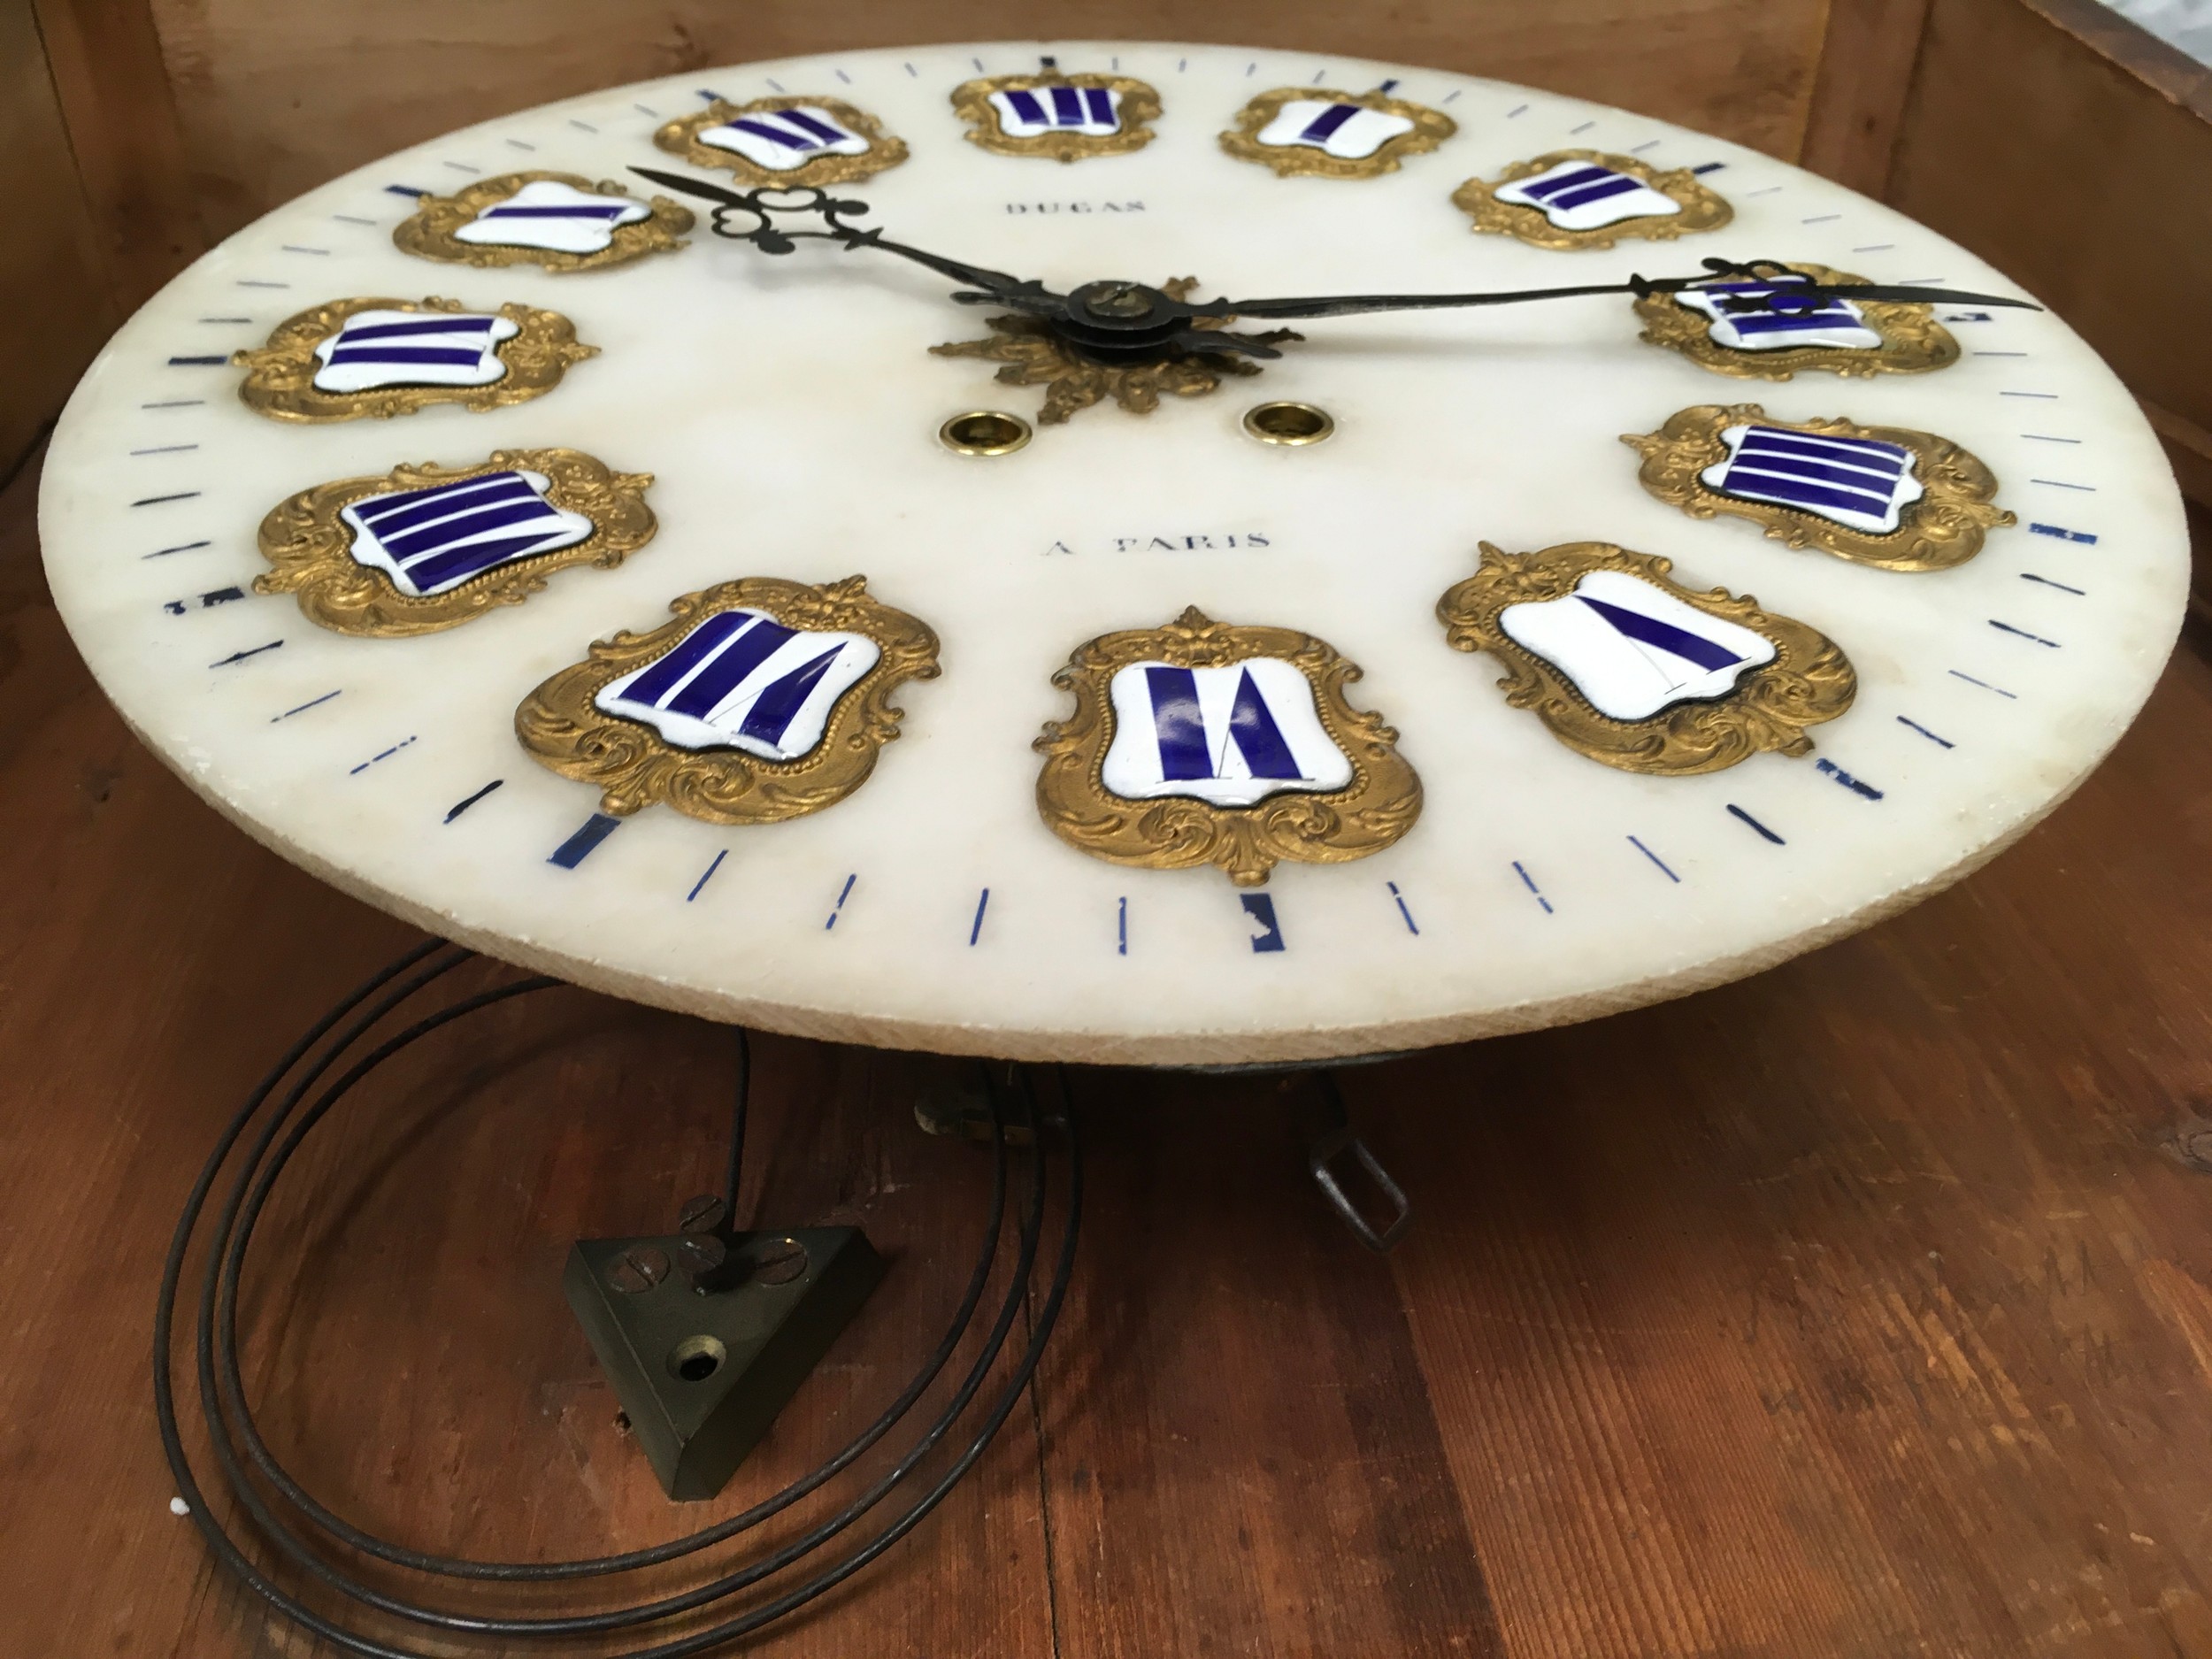 Quality wall clock with gilded enamel hour markers, signed Dugas a Paris to dial. Housed in a glazed - Image 6 of 9